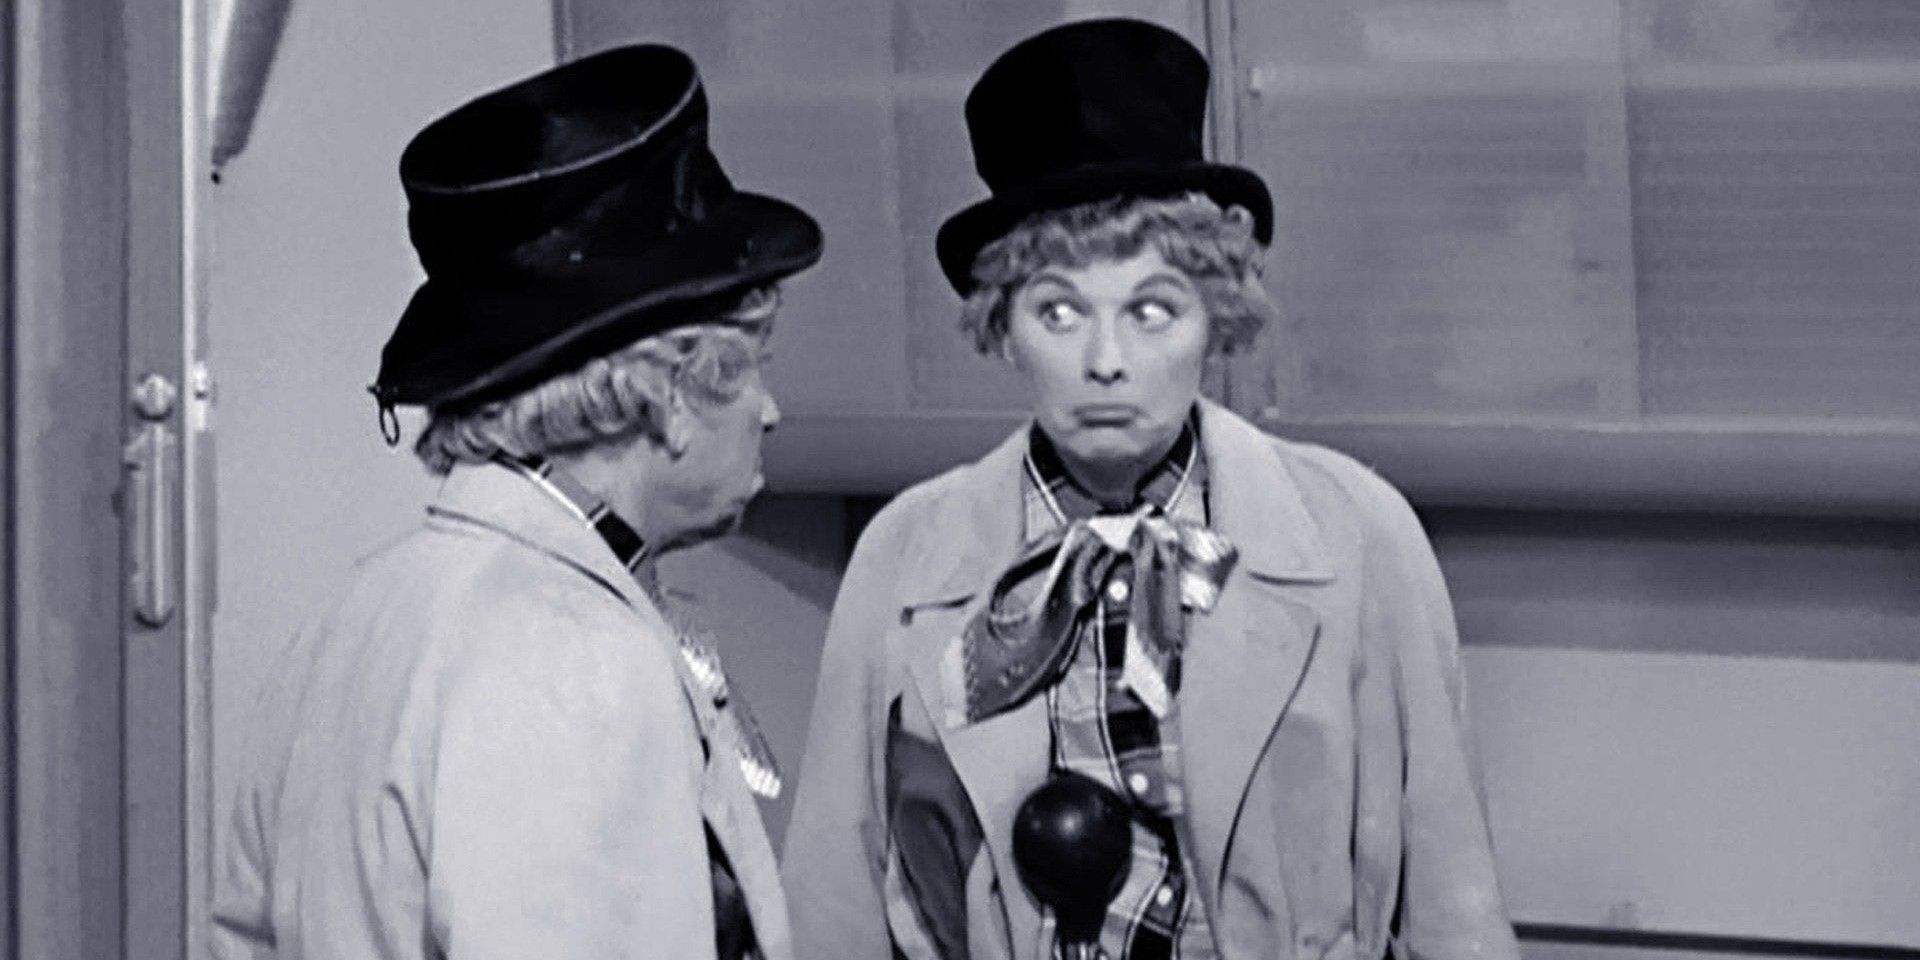 Lucy performs the mirror act with Harpo Marx while dressed as Harpo Marx in I Love Lucy Harpo Marx